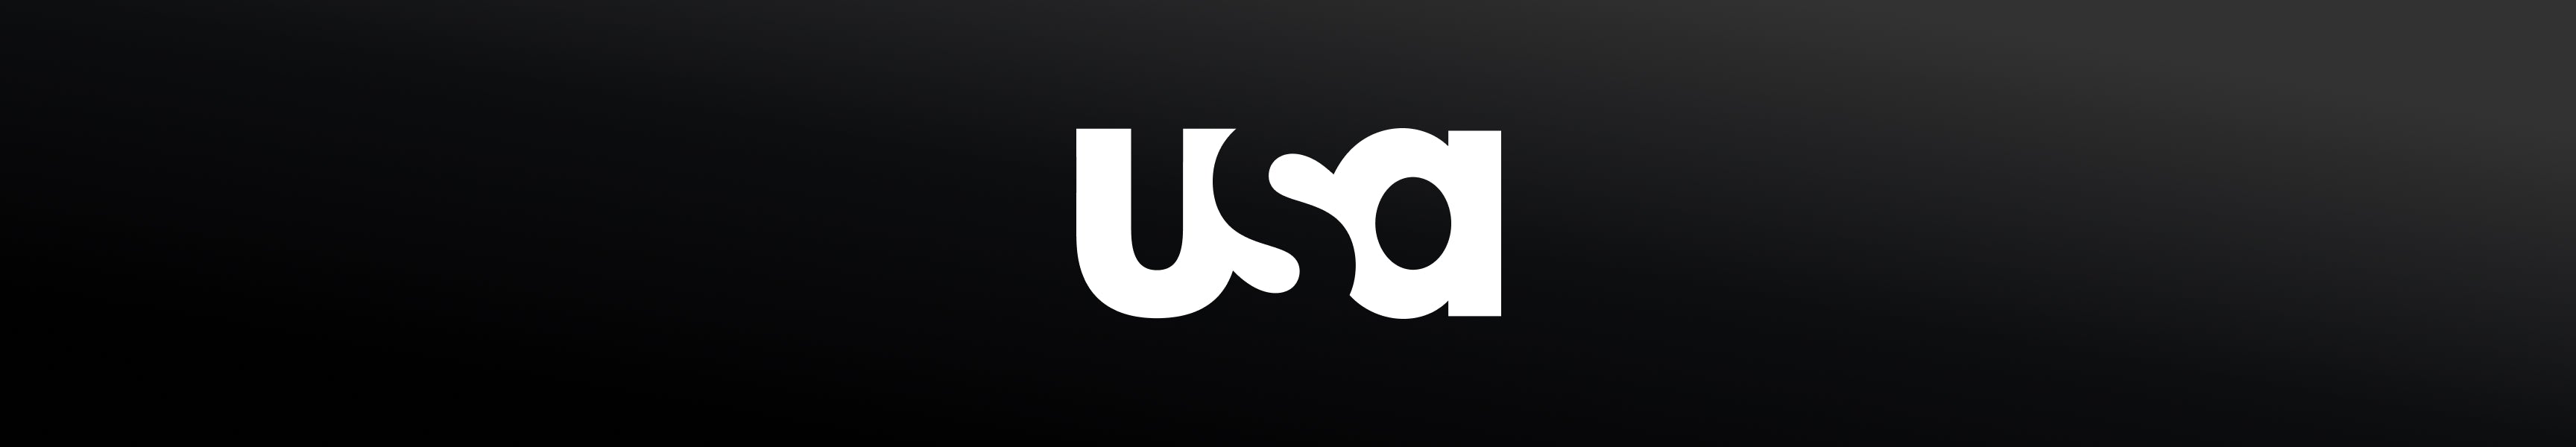 USA Network New Arrivals